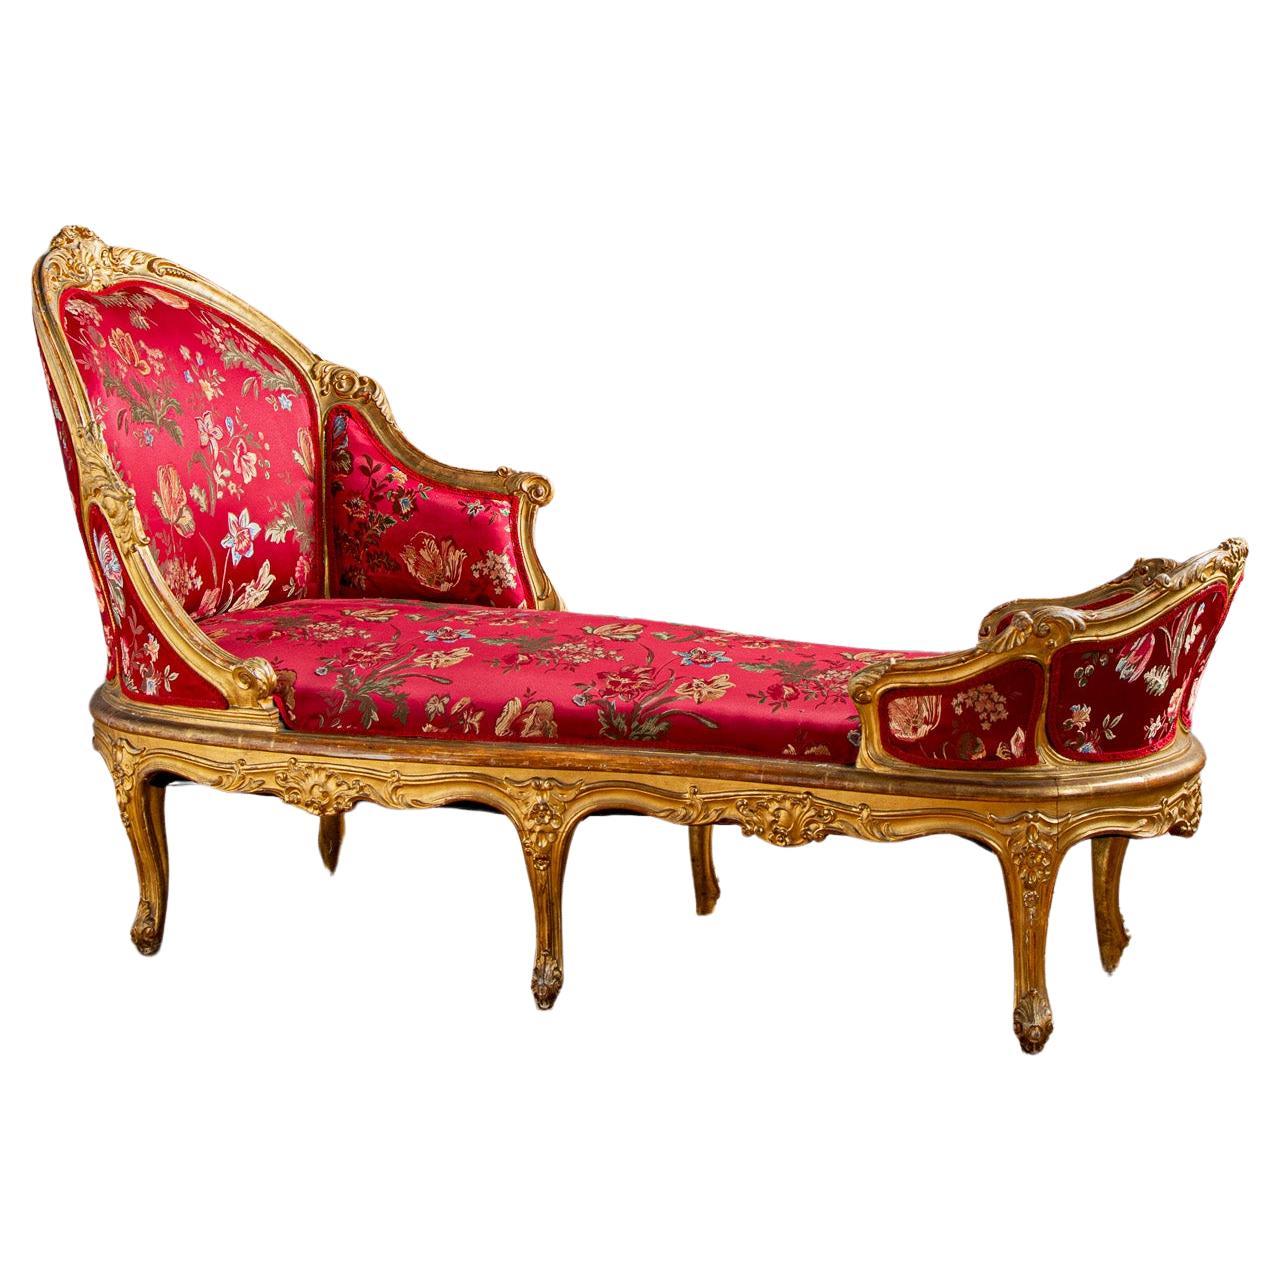 Circa 1880 Italian Giltwood LXV Style Chaise Longue For Sale